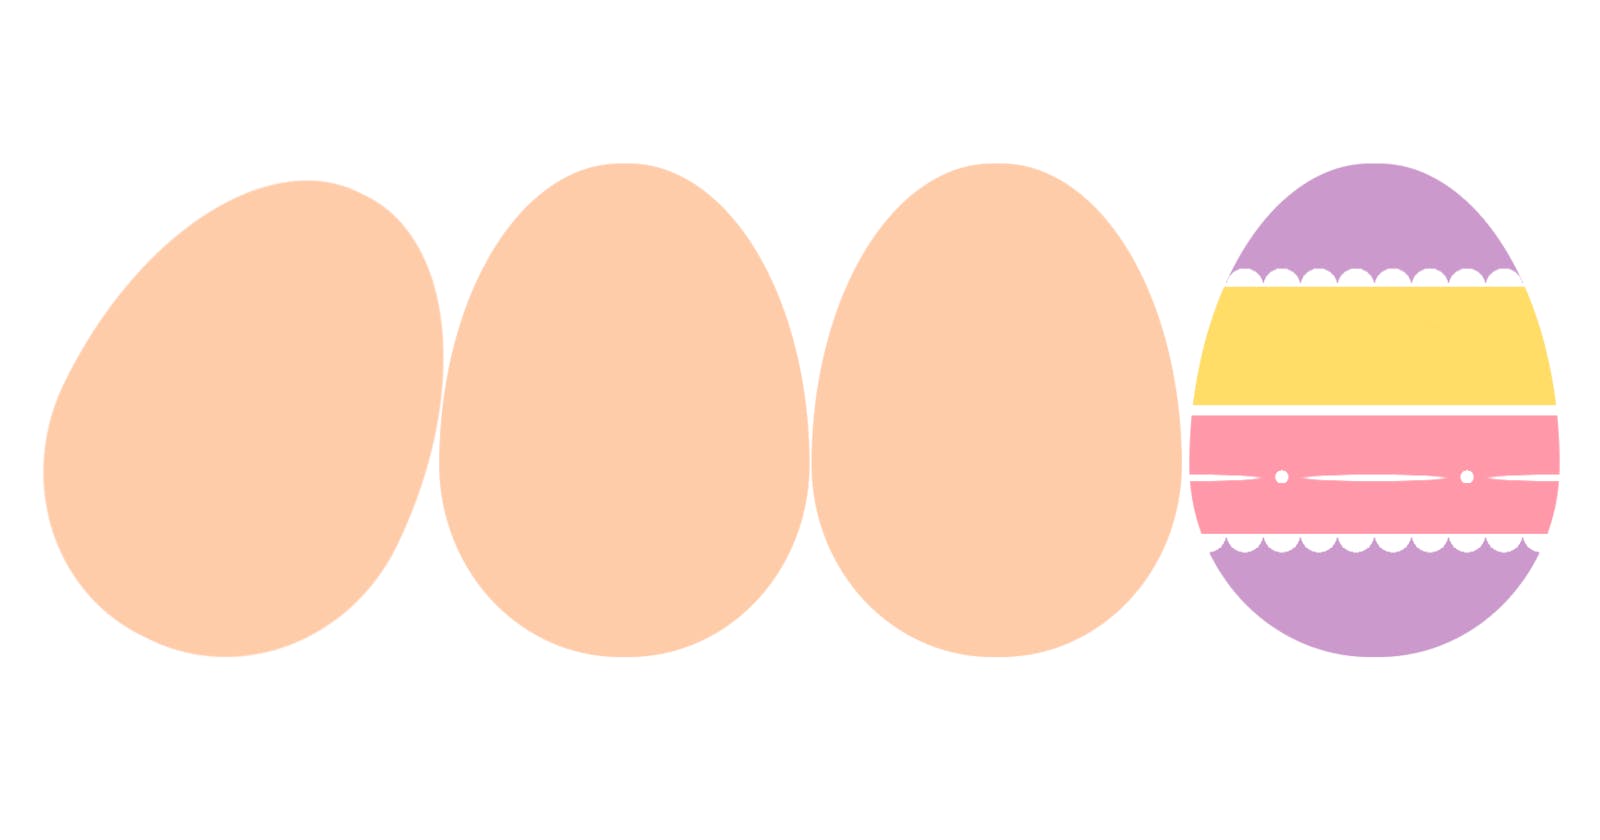 Drawing an Egg with CSS